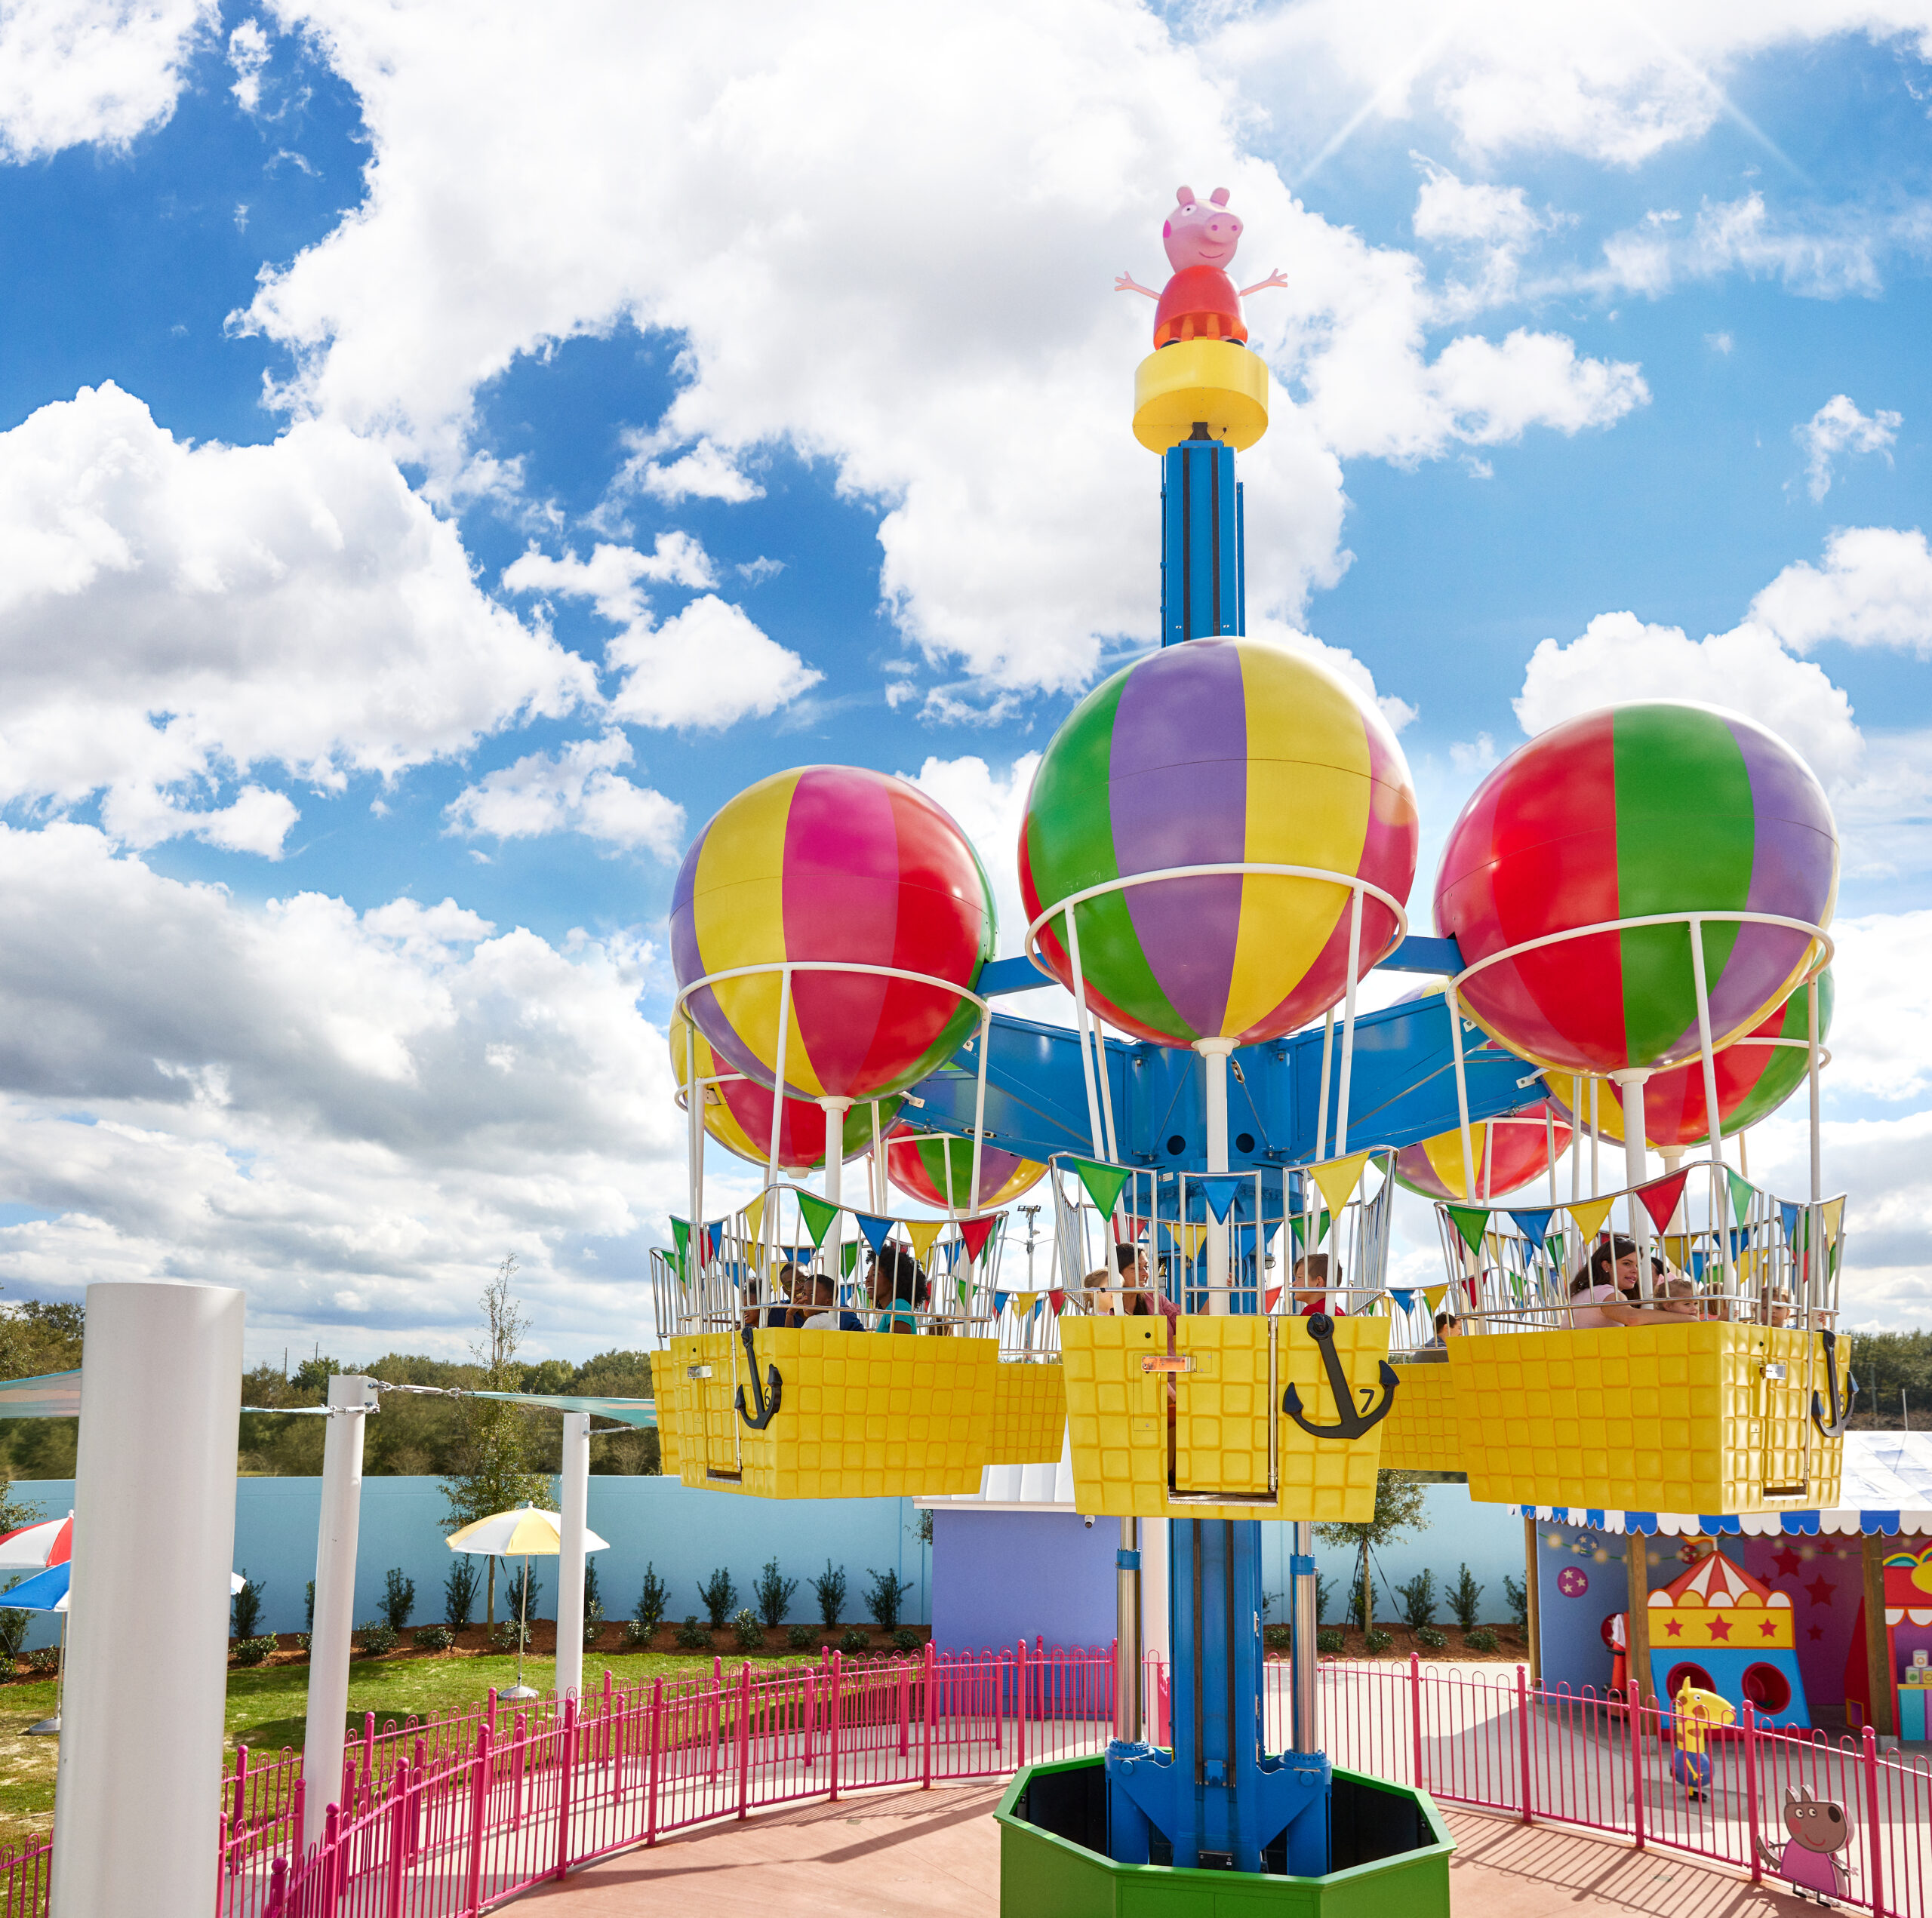 Peppa Pig's Balloon Ride at the world's first peppa pig theme park